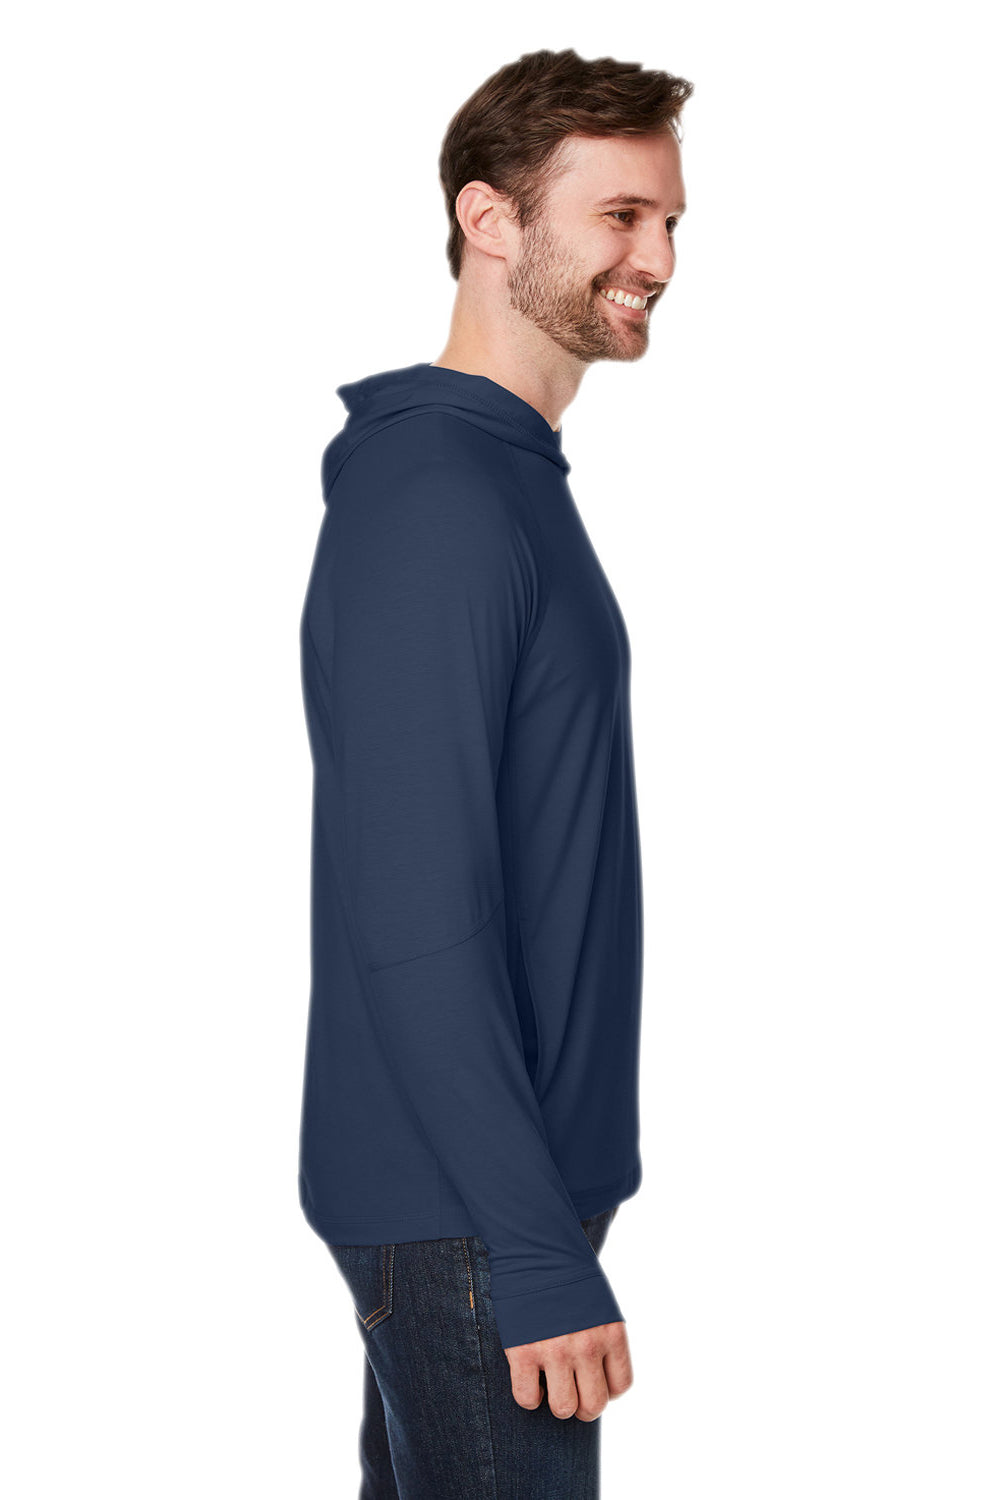 North End NE105 Mens Jaq Stretch Performance Hooded T-Shirt Hoodie Classic Navy Blue Side